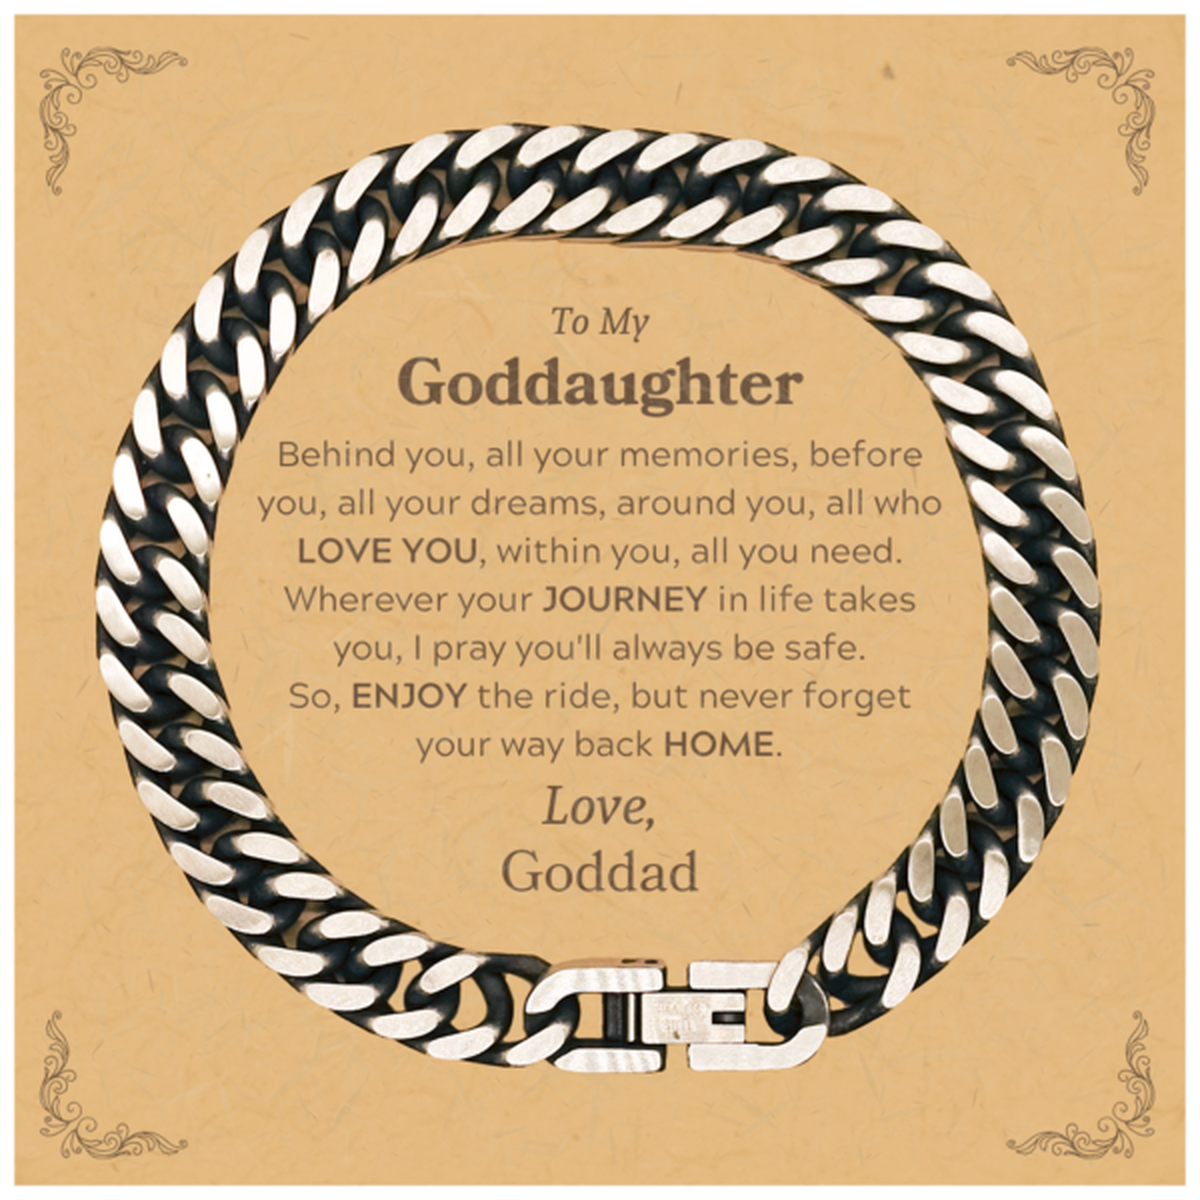 To My Goddaughter Graduation Gifts from Goddad, Goddaughter Cuban Link Chain Bracelet Christmas Birthday Gifts for Goddaughter Behind you, all your memories, before you, all your dreams. Love, Goddad